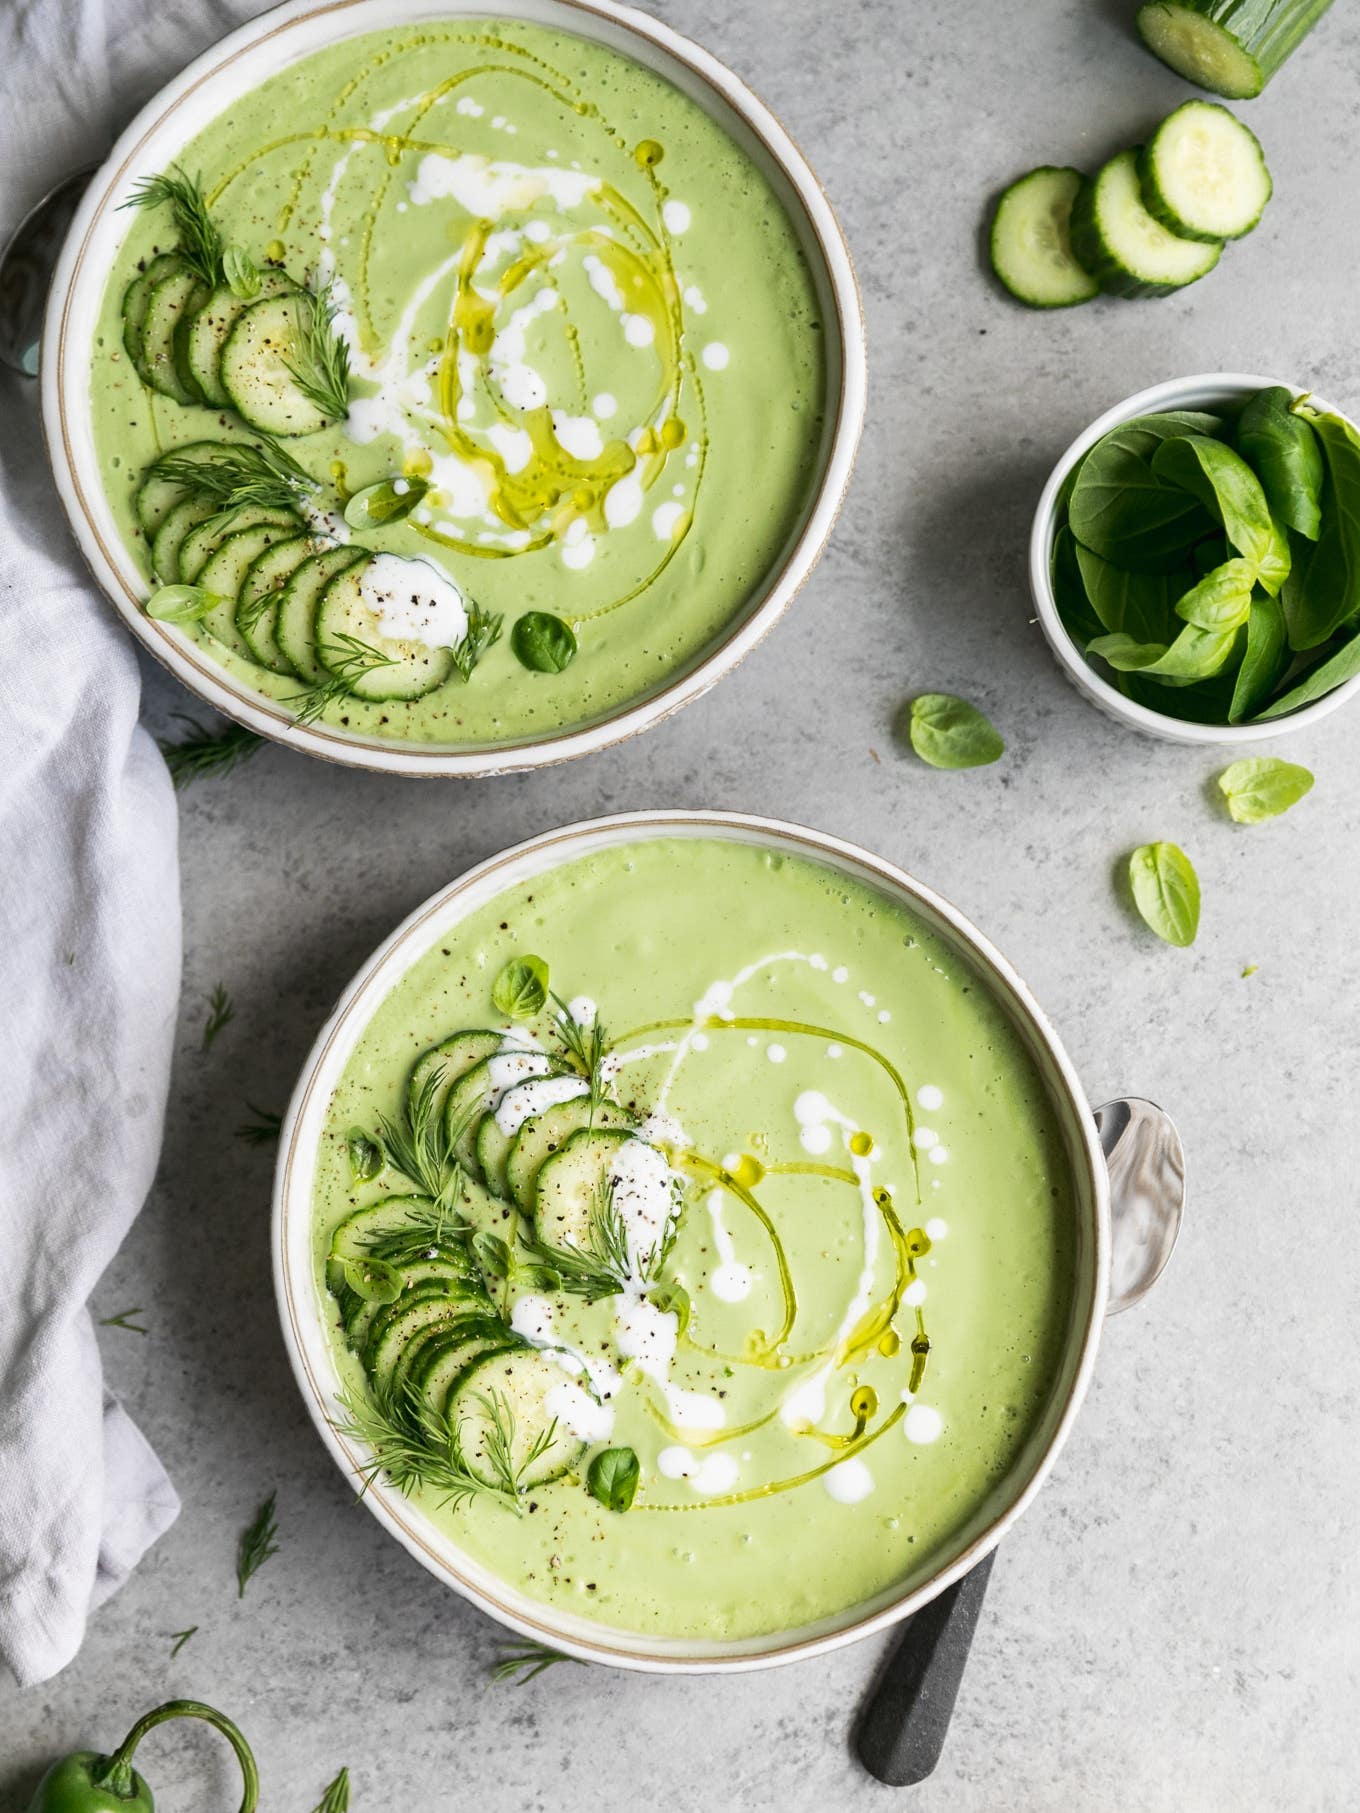 Green Goddess Isn’t Just for Salads—Try These 9 Unexpected Recipes